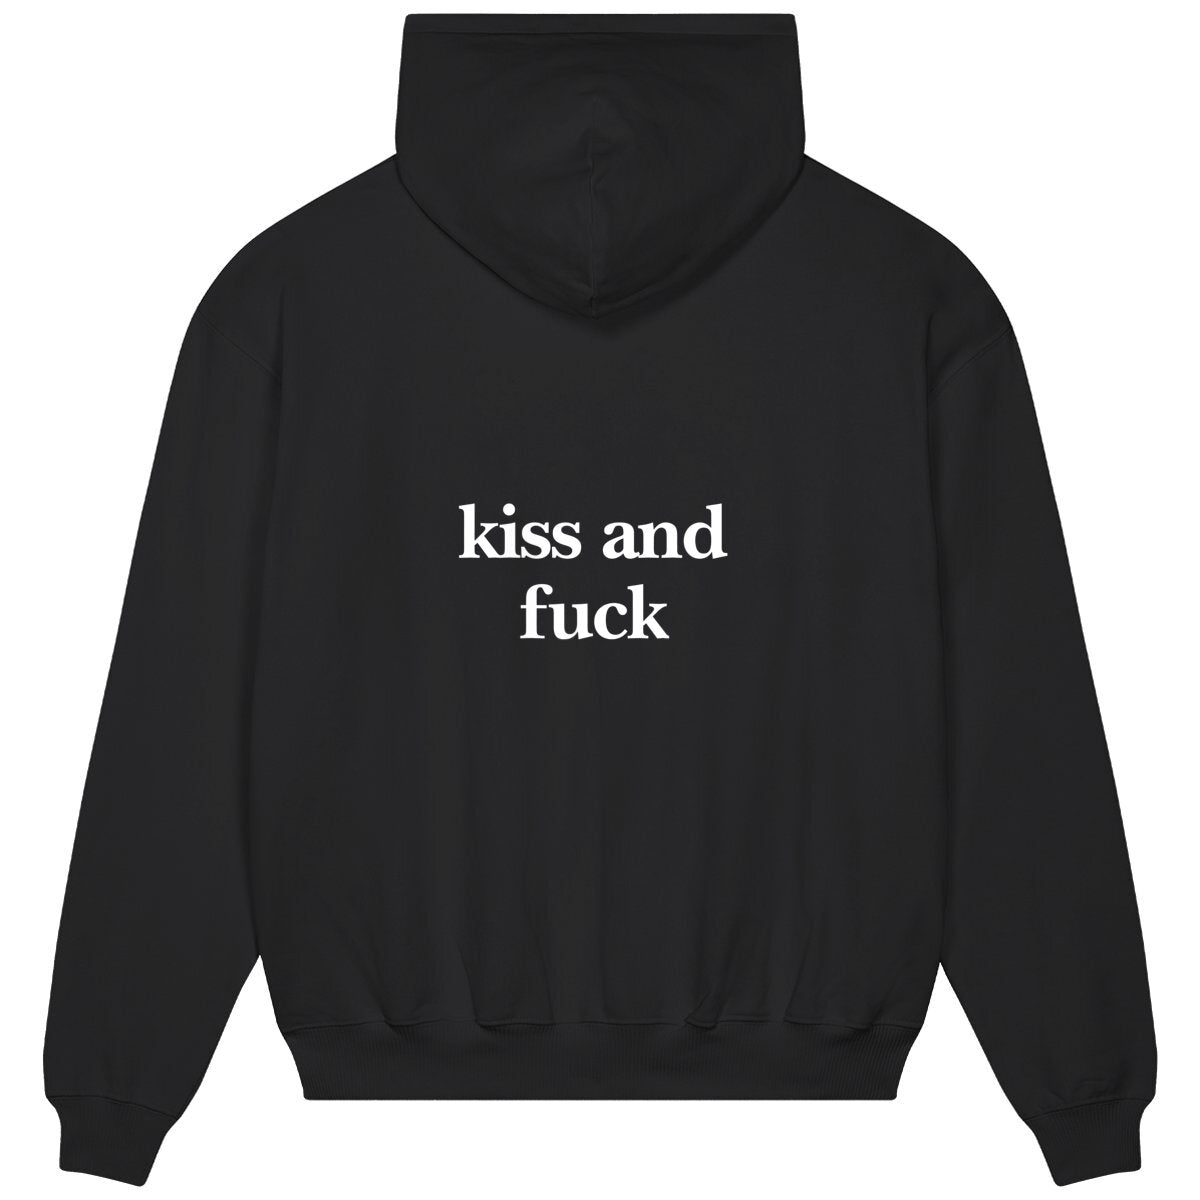 kiss and fuck hoodie over back. kiss and fuck hoodie over. cigarette after sex hoodie over. garçon garçon essentiel oversized hoodie. Sleek in black and whispering Parisian chic, this hoodie is the sartorial whisper of 'garçon garçon' — a statement of understated elegance. Perfect for those who carry a piece of Paris in their hearts and a touch of audacity on their sleeves.